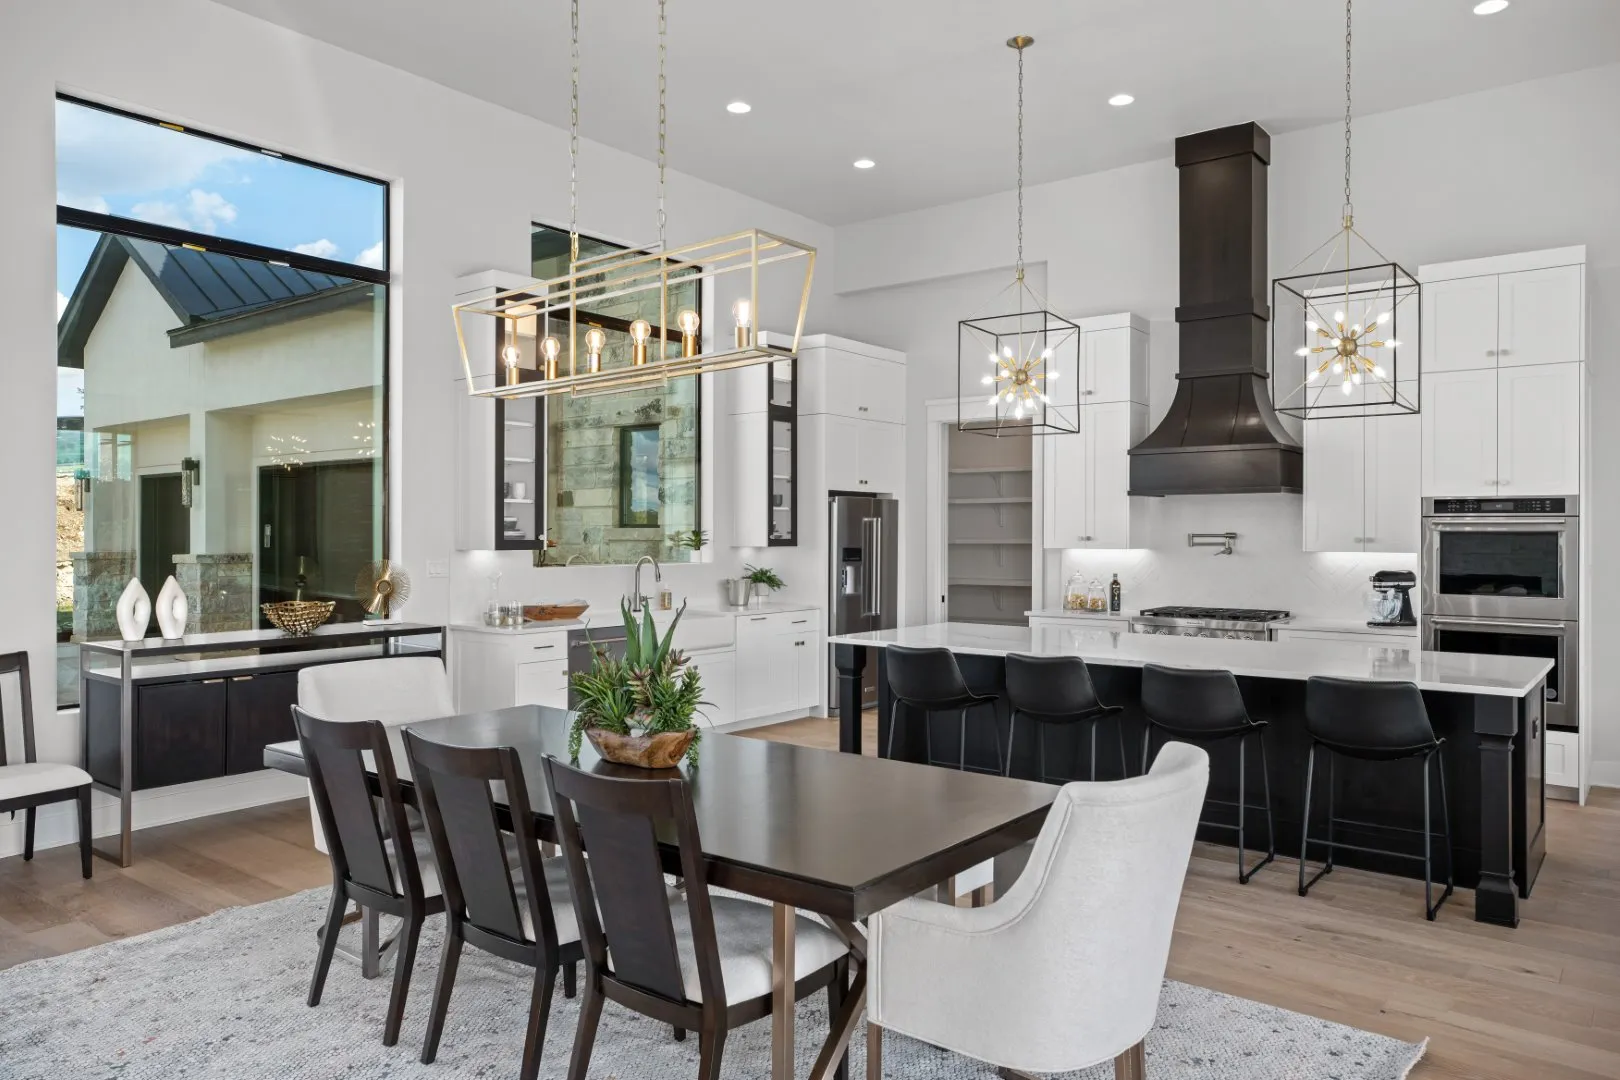 A beautiful updated modern kitchen by T.A. French Home Builders with a bar and dining area that is open concept.